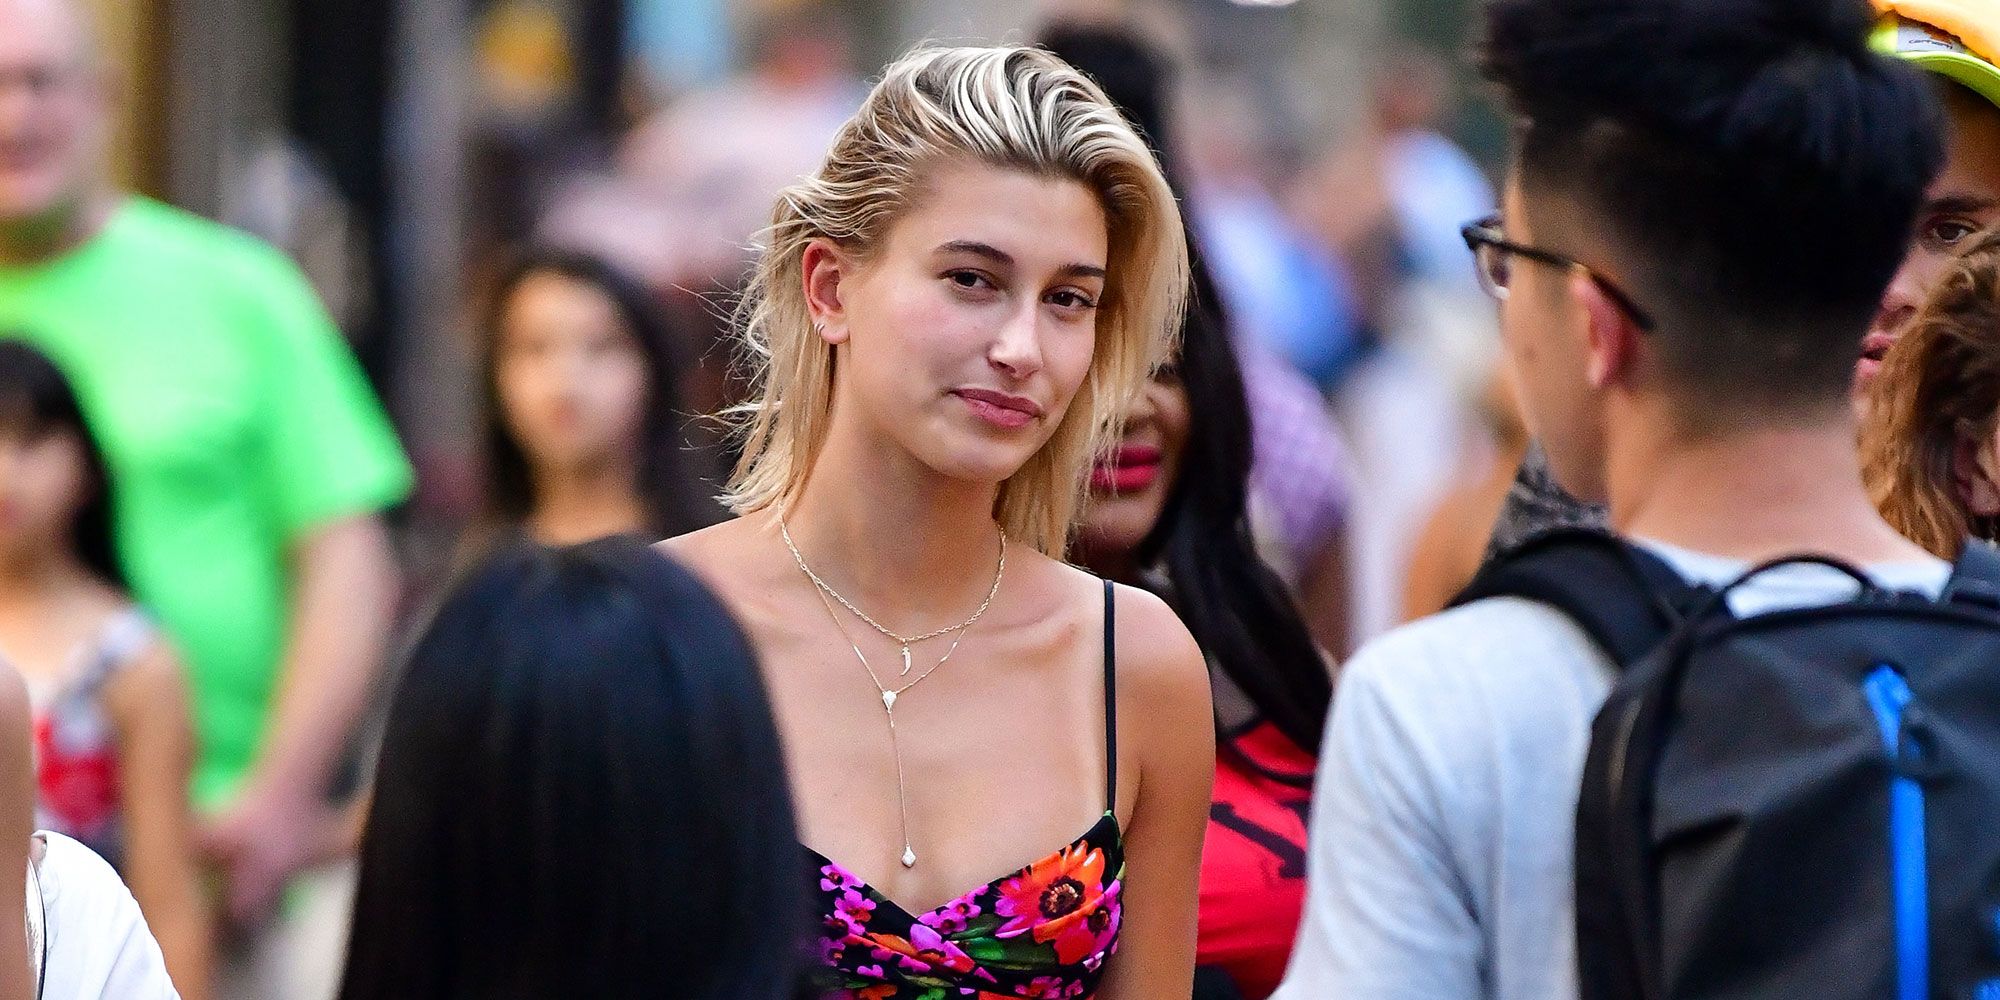 Hailey Bieber's Beauty Evolution Goes From Glowing To Glazed